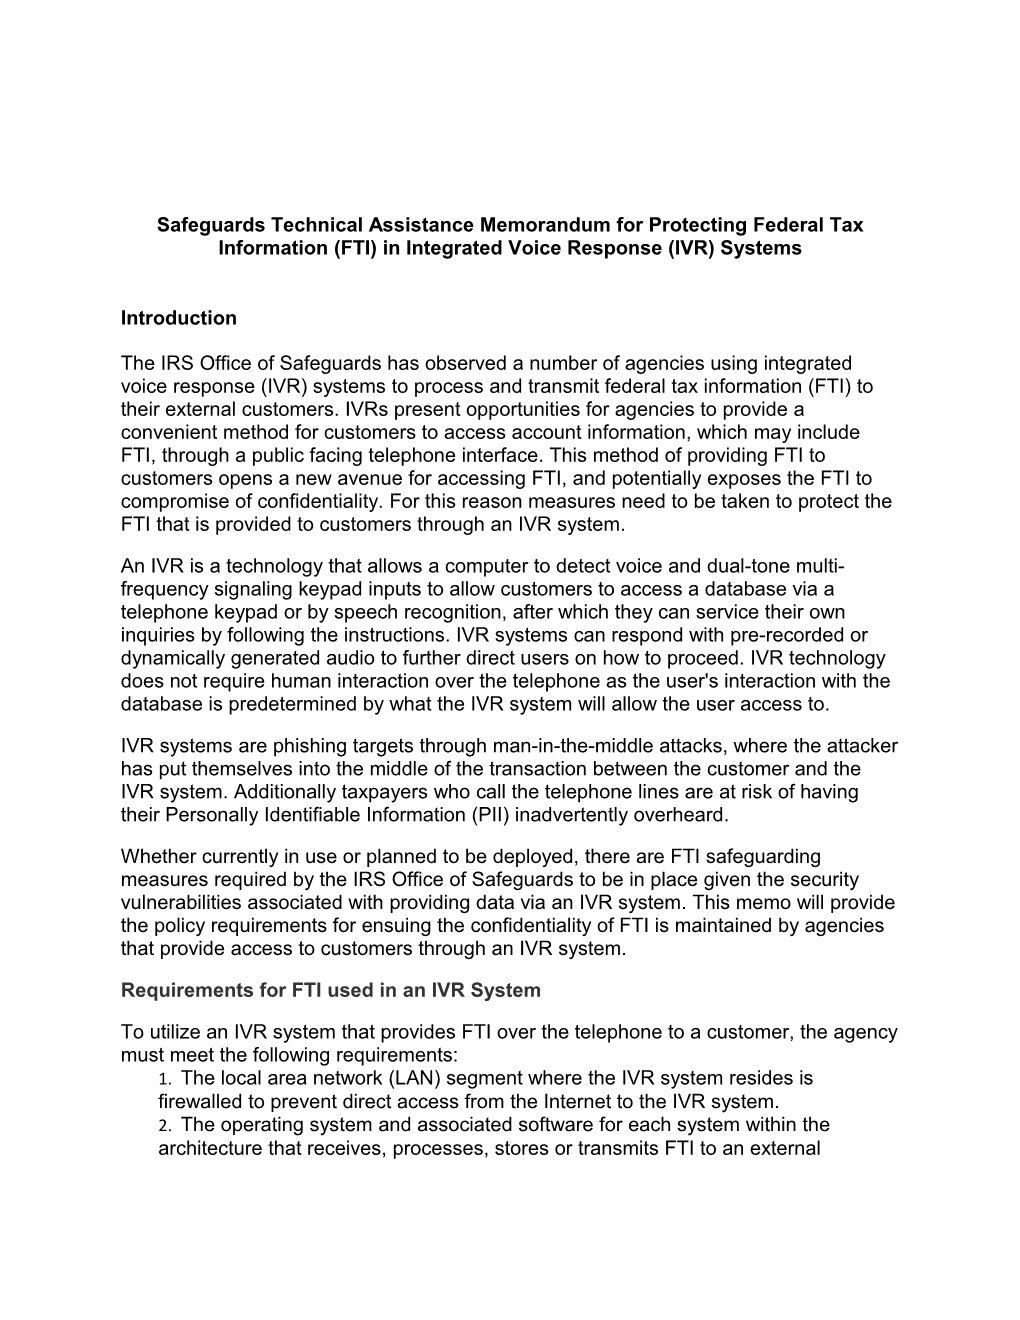 Safeguards Technical Assistance Memorandum for Protecting Federal Tax Information (FTI)